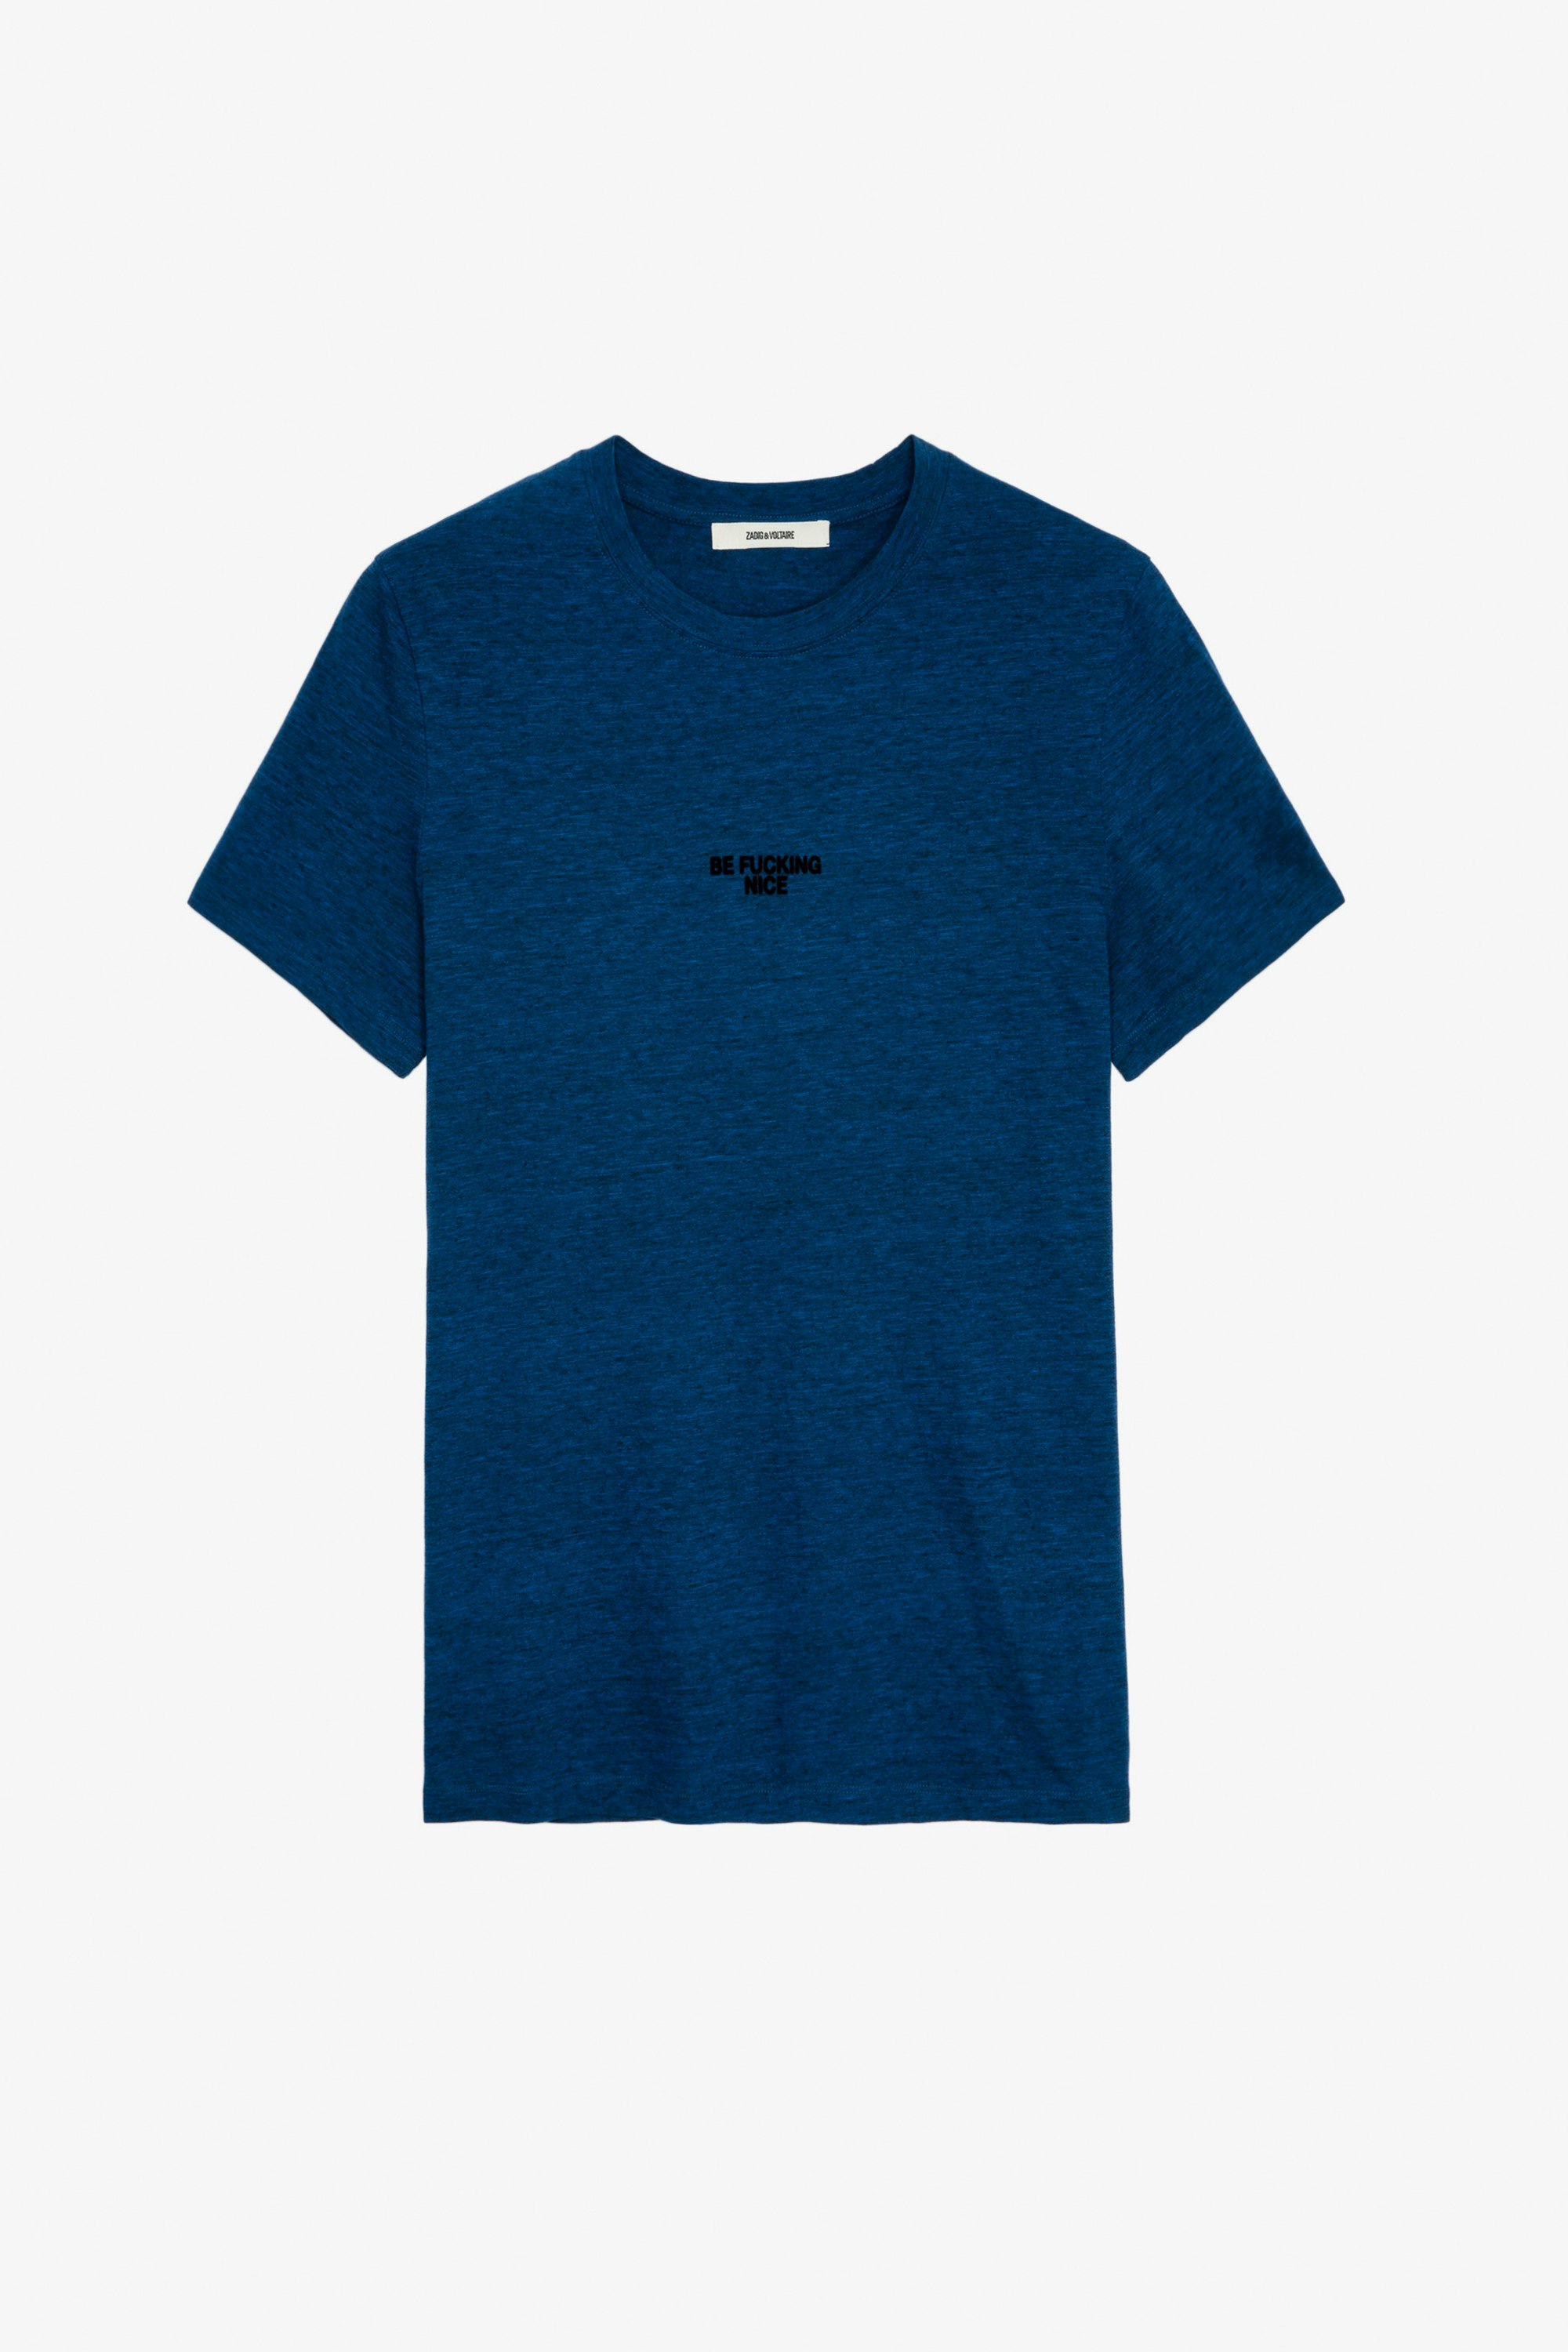 Tommy T-shirt - Men’s blue T-shirt with “Be Fucking Nice” slogan.